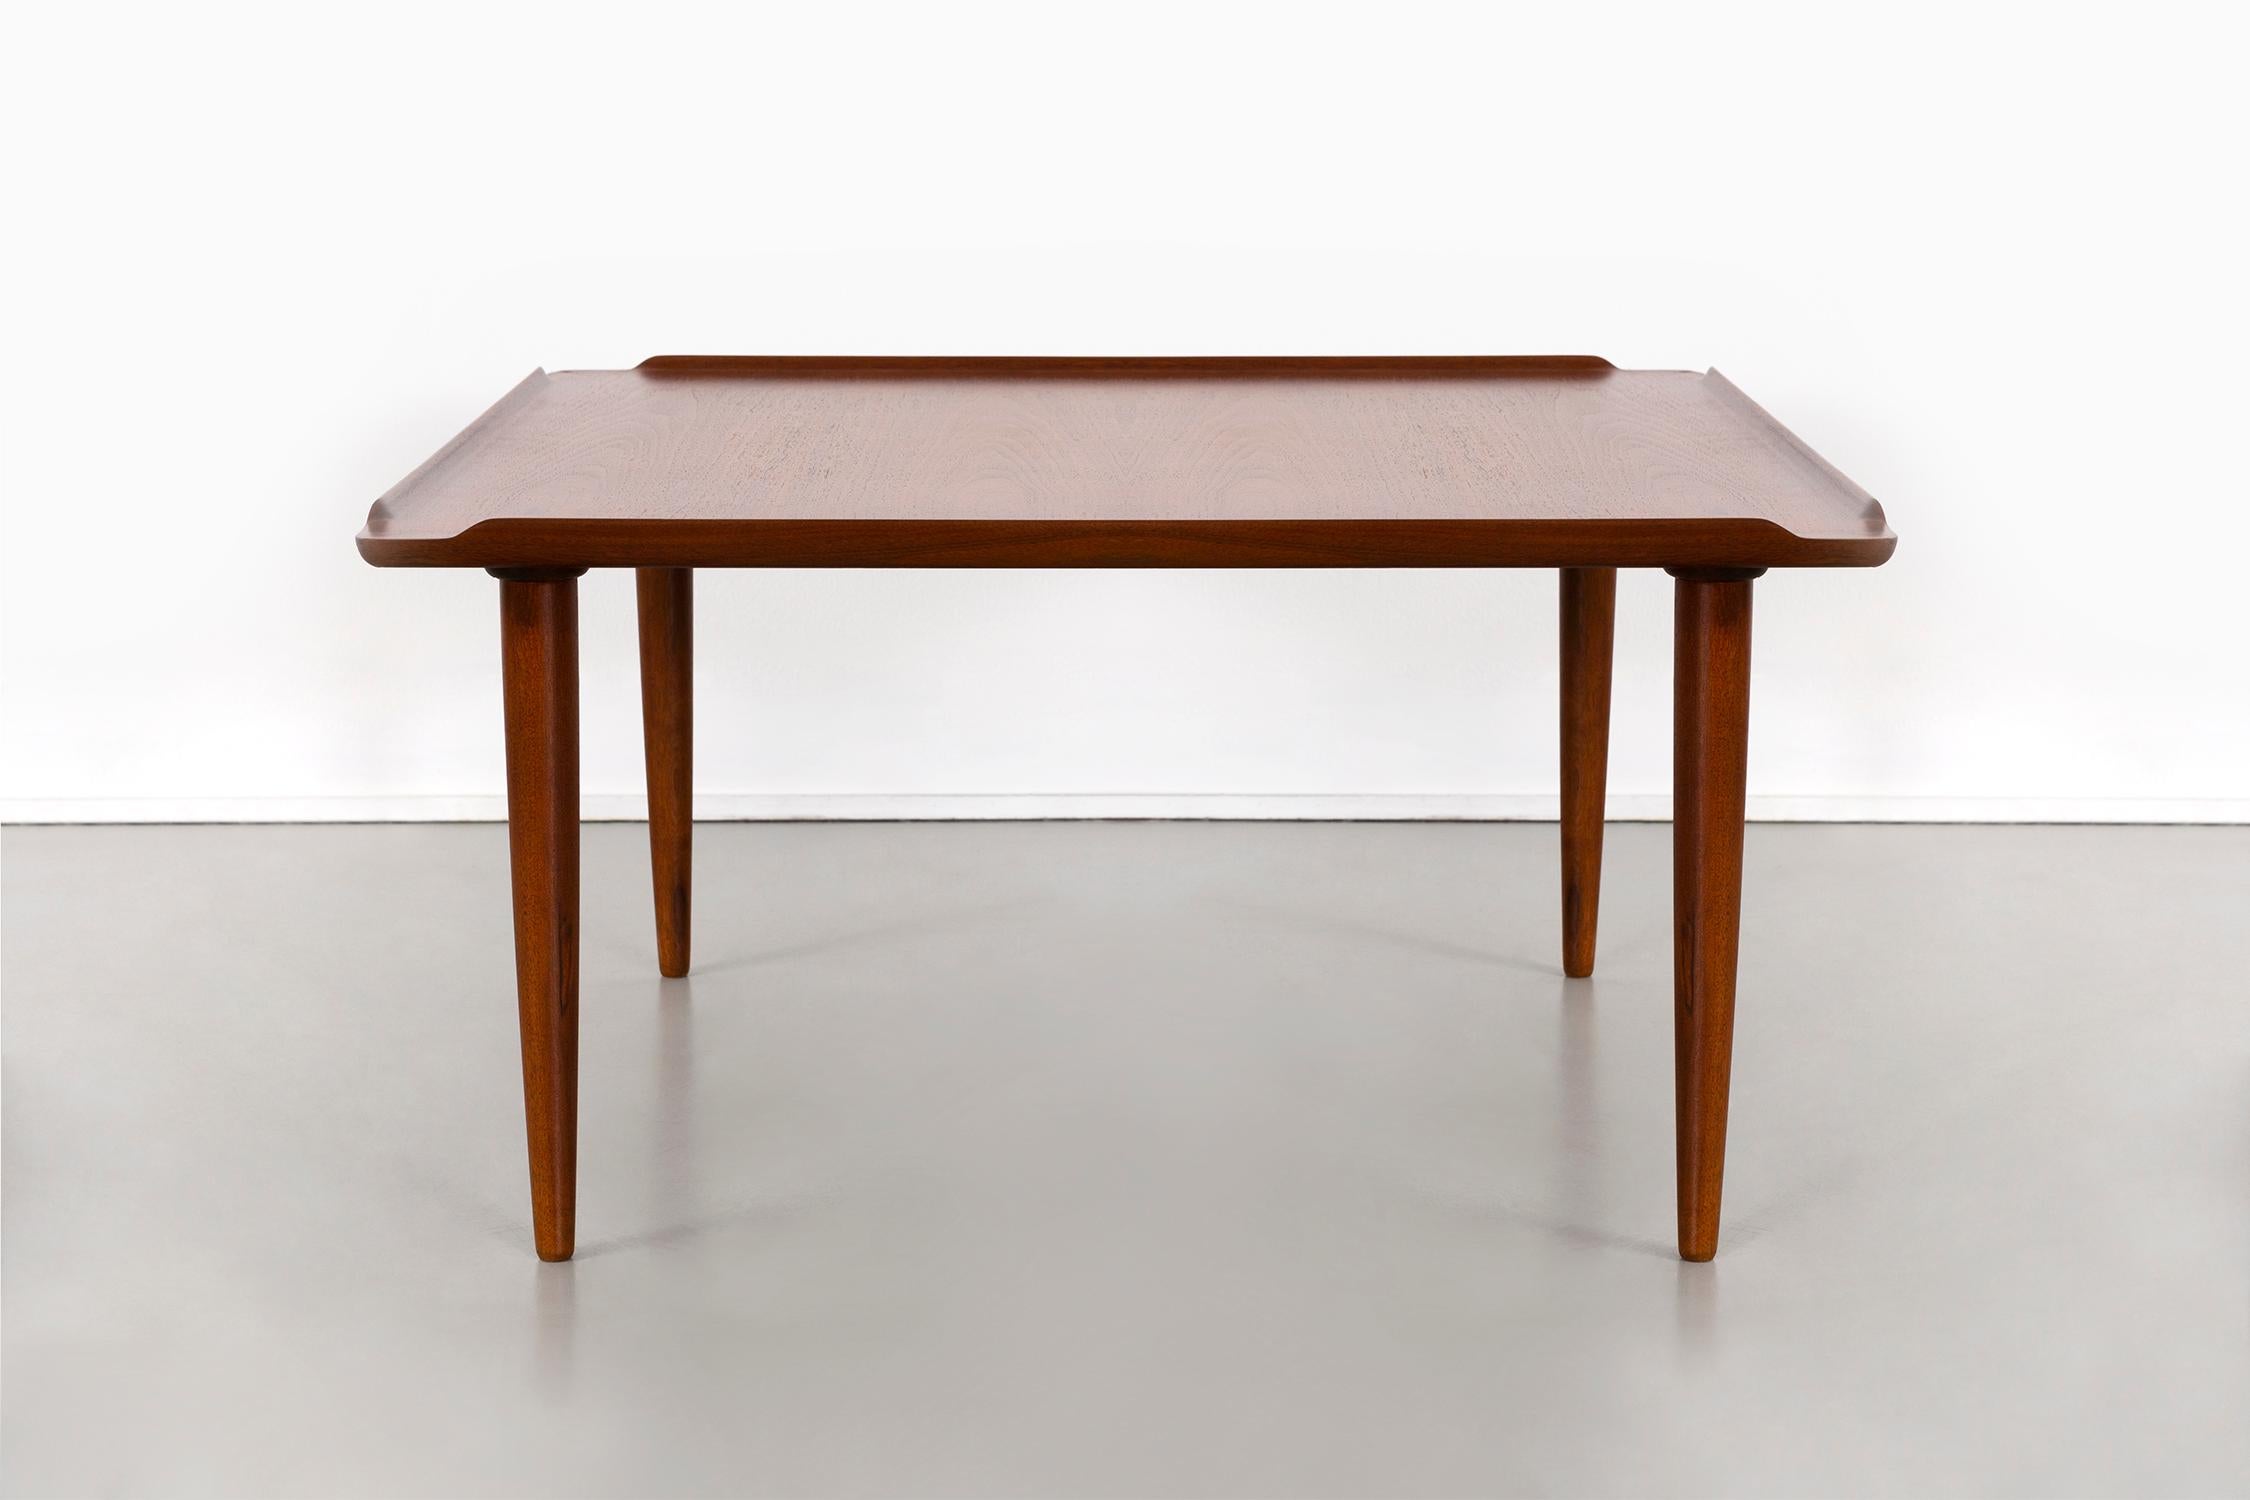 Coffee table

Designed by Poul Jensen for Selig

Denmark, circa 1960s.

Teak

Measures: 16 ½” H x 31 15/16” W x 31 15/16” D.

Freshly refinished in excellent condition.